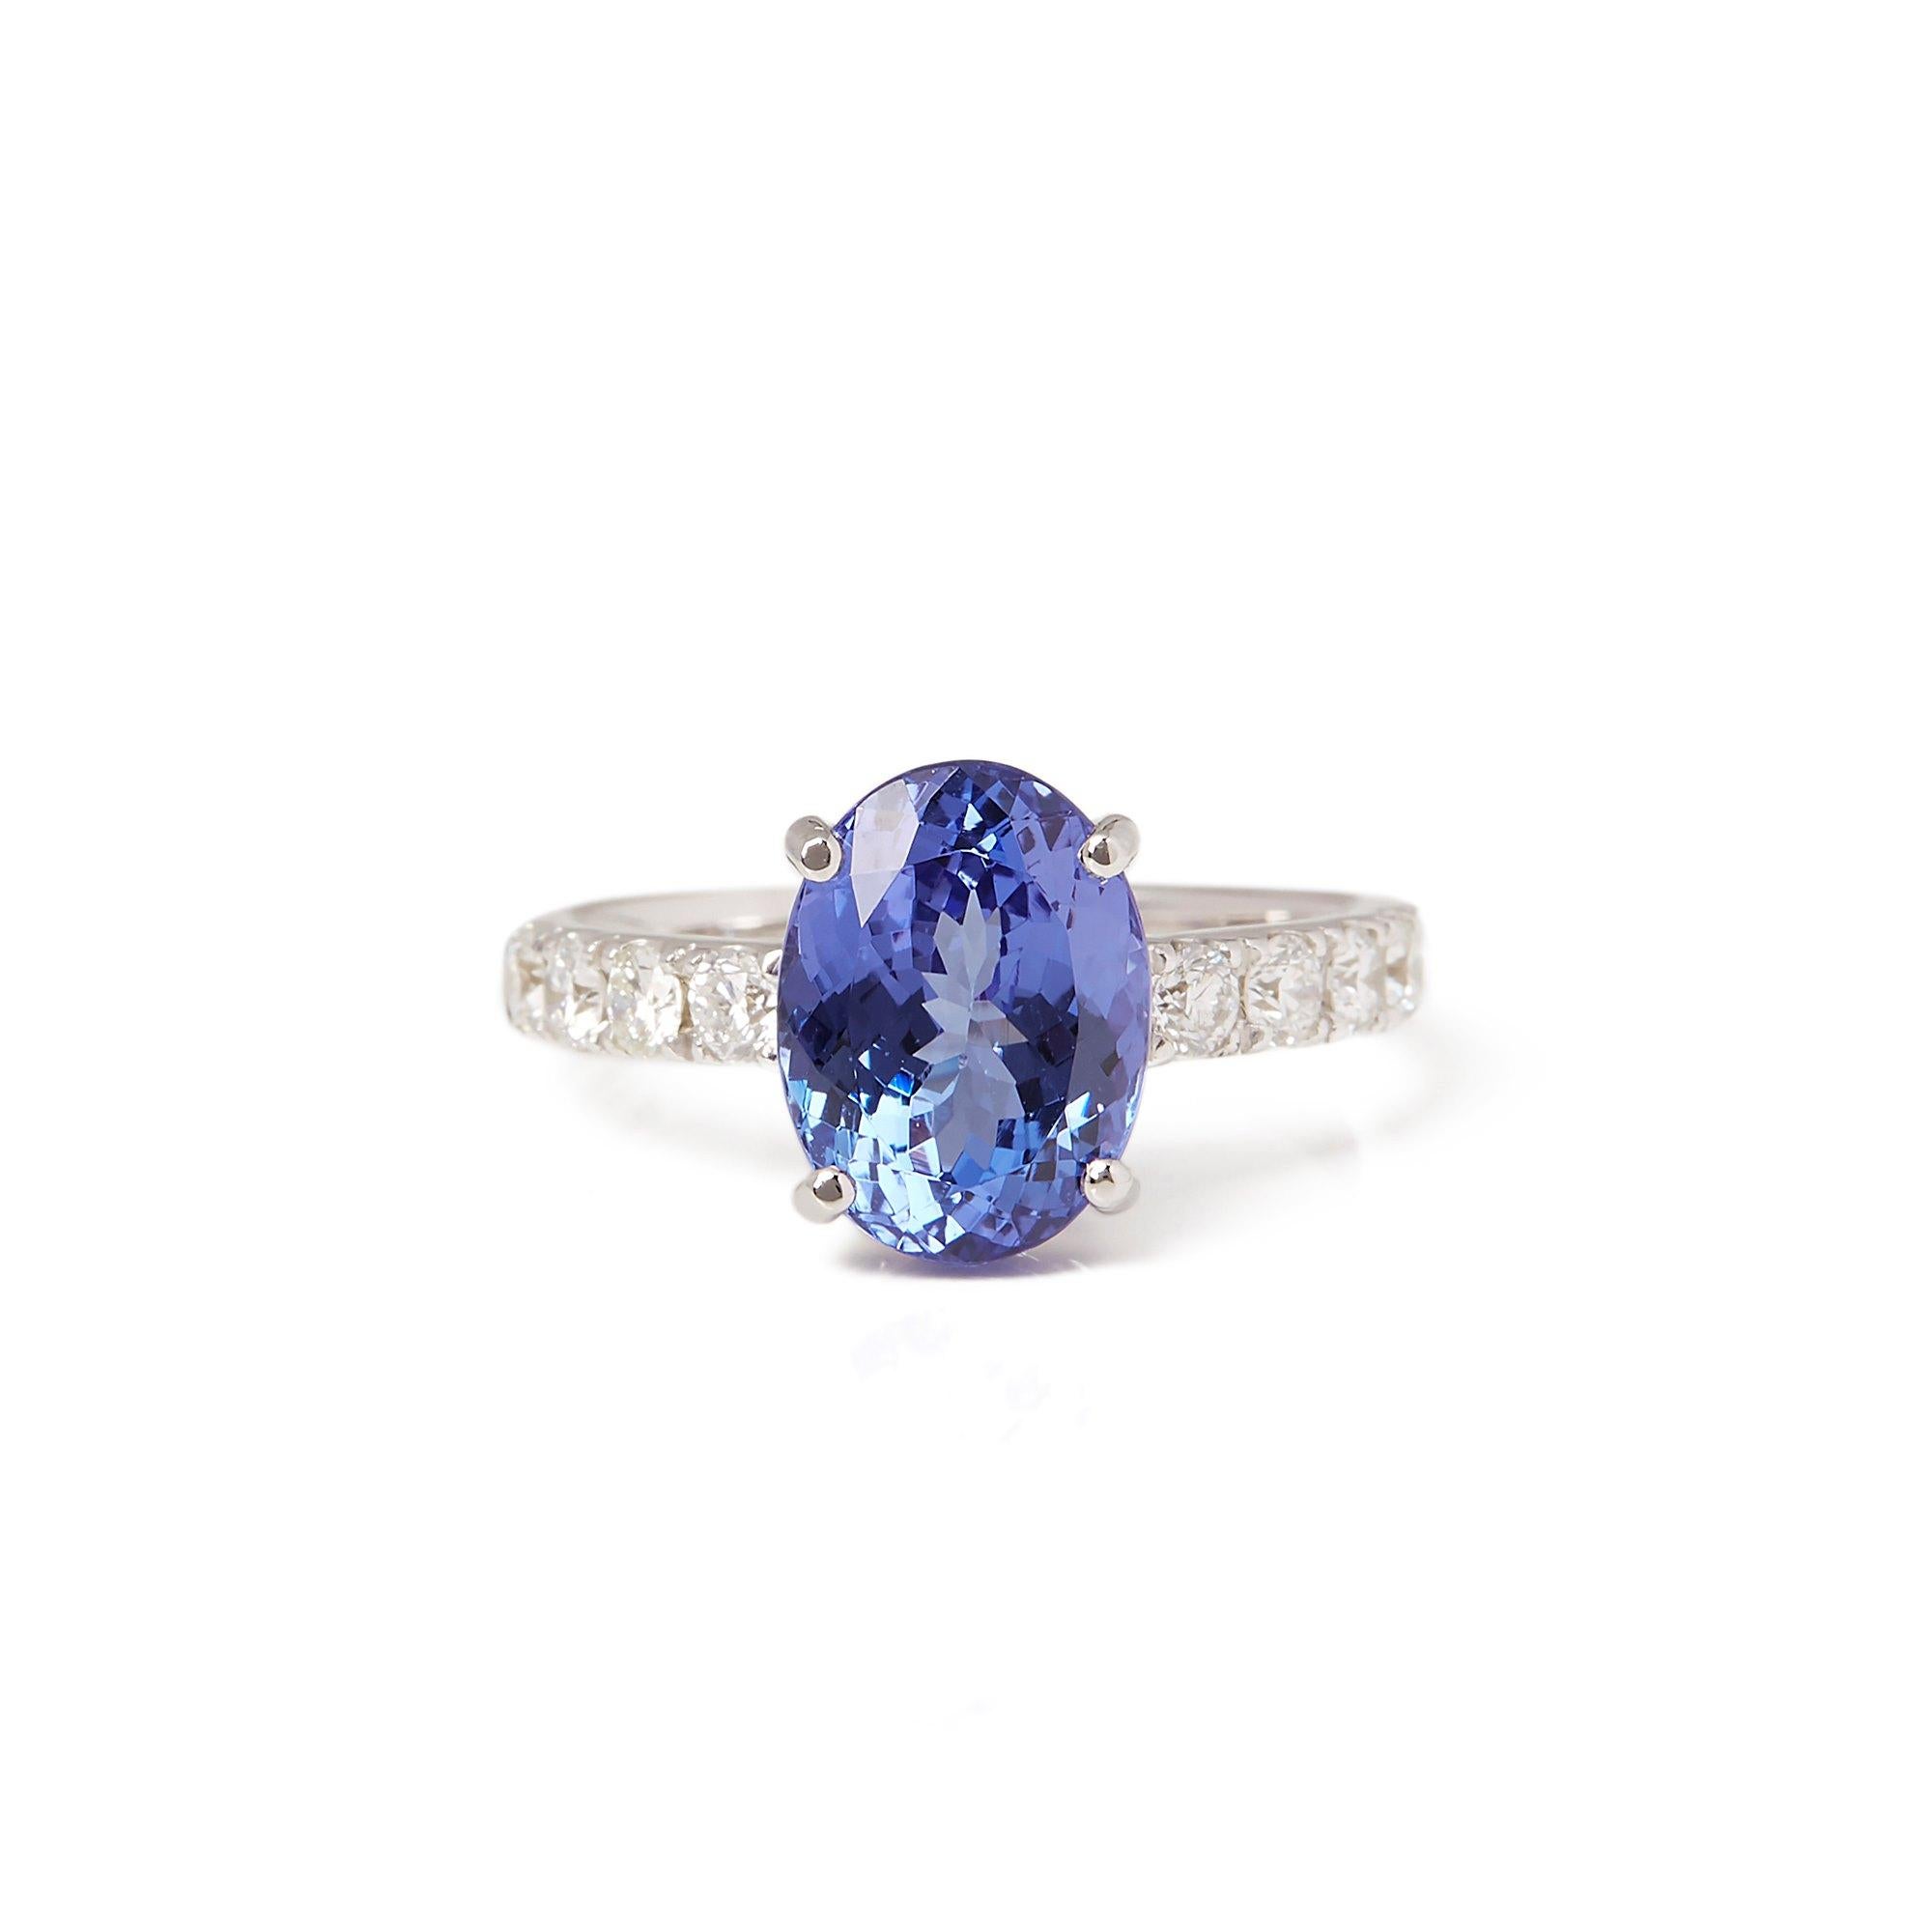 This ring designed by David Jerome is from his private collection and features one oval cut Tanzanite totalling 4.33cts sourced in the D block mine Tanzania. Set with round brilliant but Diamonds totalling 0.53cts mounted in an 18k white gold